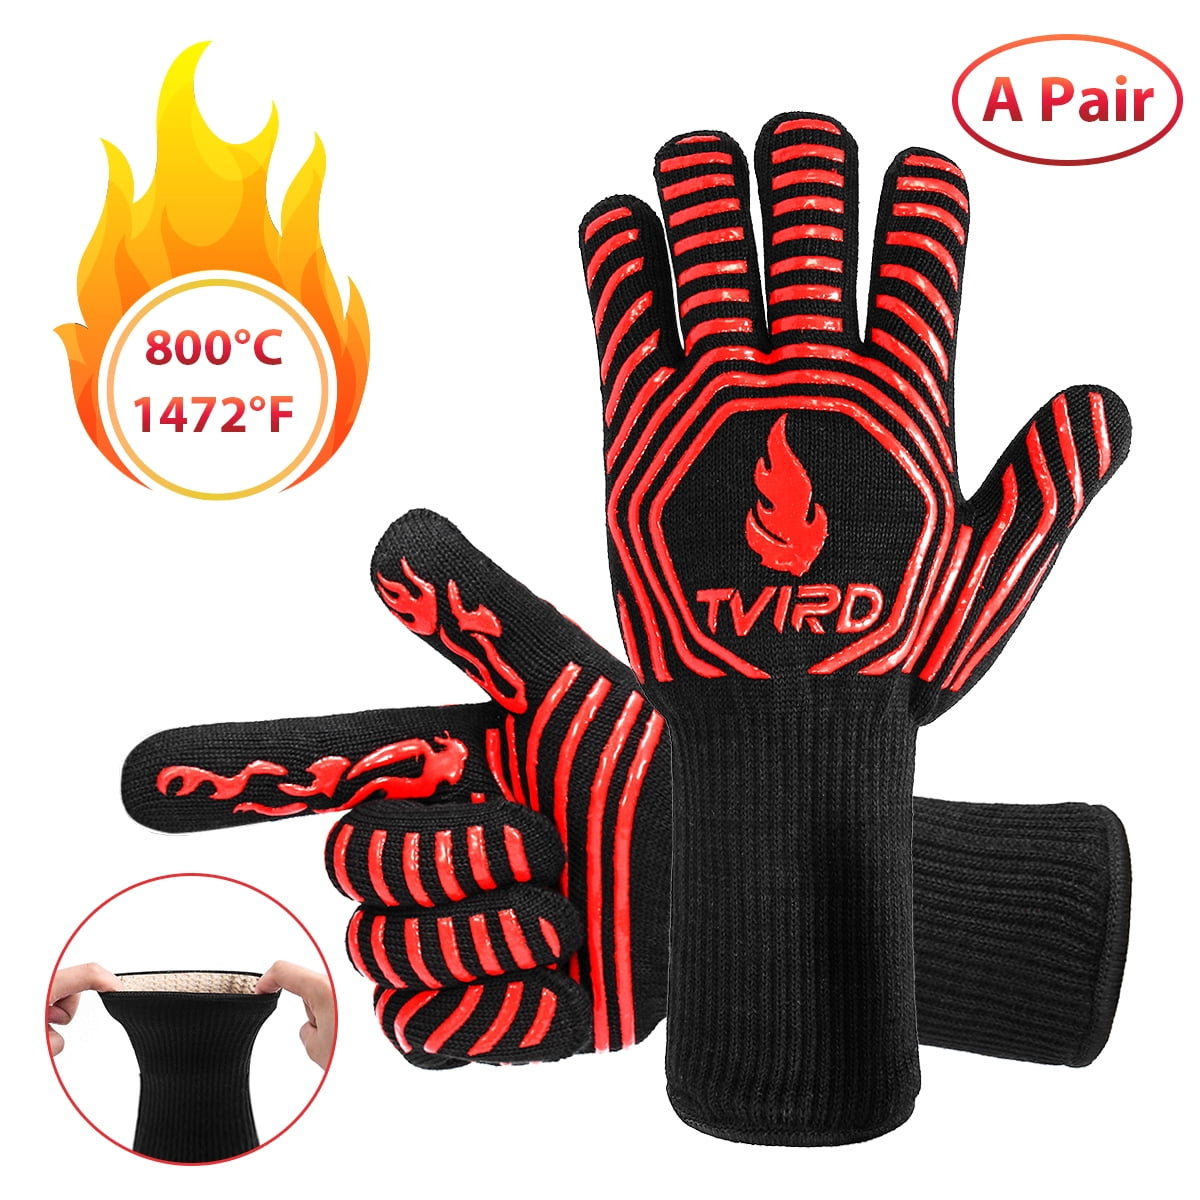 1472℉ with 5 Fingers for Grilling Cooking Baking Roasting（Black and Blue） JSF Grilling Gloves BBQ Oven Heat Resistant Mitts up to 800 ℃